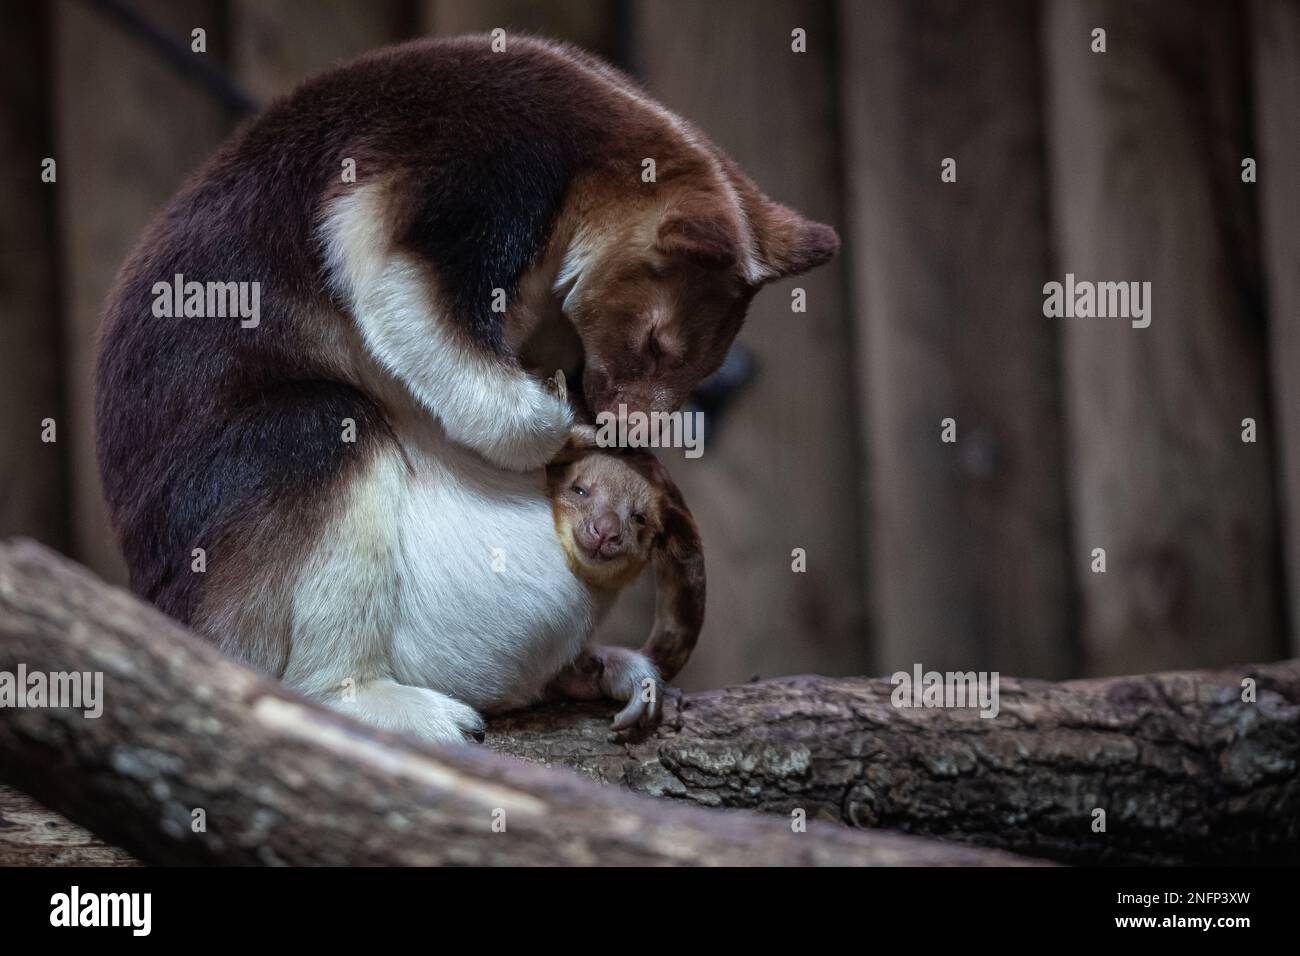 PARIS, Feb. 18, 2023 (Xinhua) -- A Goodfellow's tree kangaroo joey peeks out of its mother's pouch at a zoo in Paris, France, Feb. 17, 2023. The Goodfellow's tree kangaroo is classified as 'endangered' on the International Union for Conservation of Nature (IUCN) Red List of Threatened Species. (Photo by Aurelien Morissard/Xinhua) Stock Photo